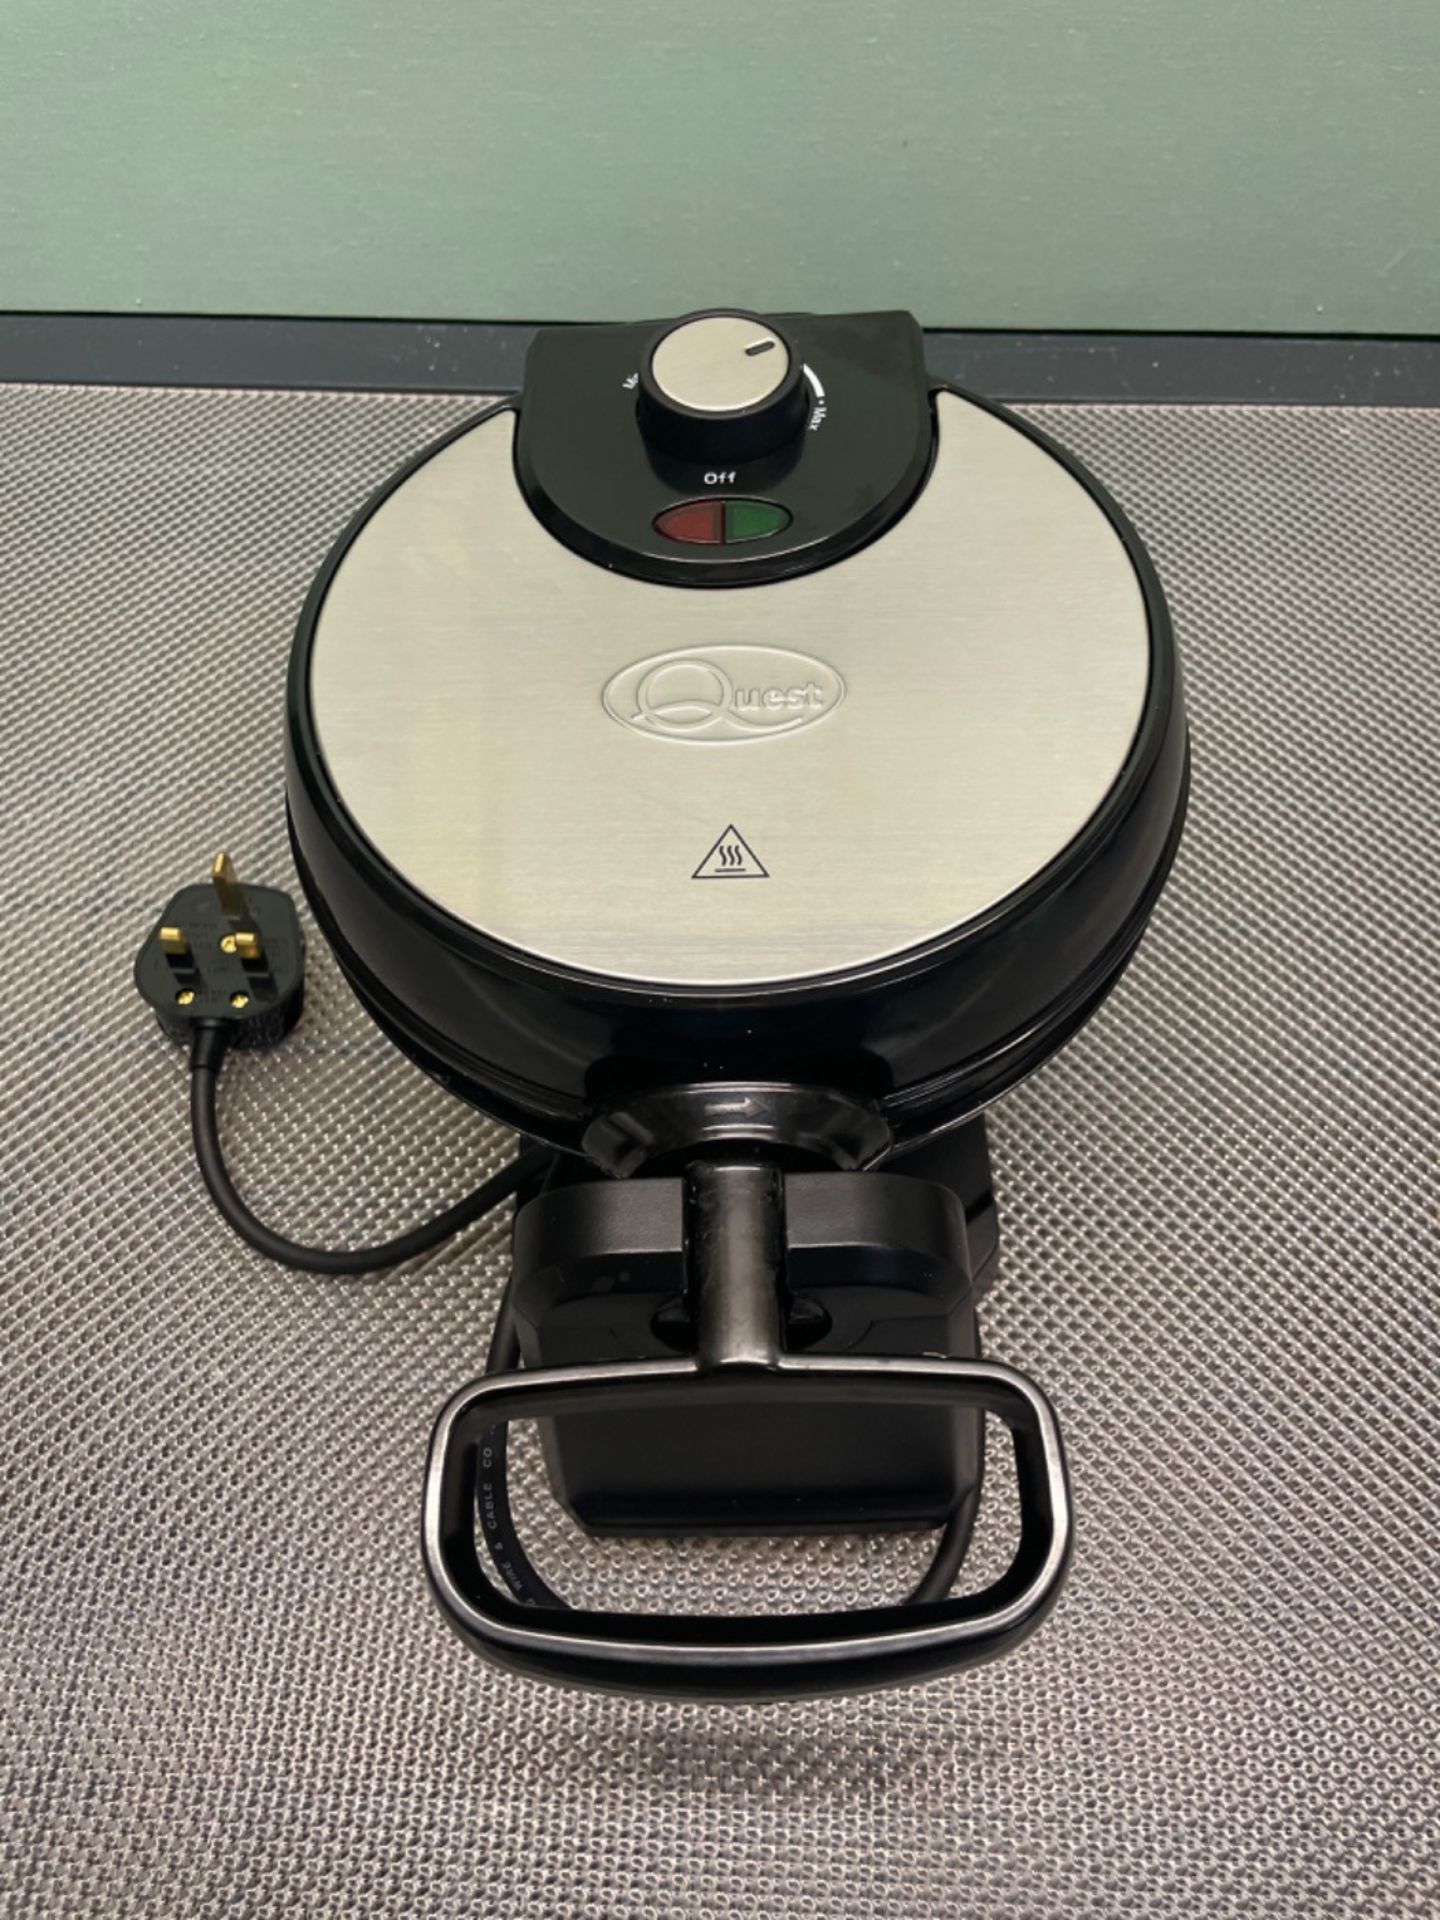 Quest 35969 Rotating Belgian Waffle Maker / Non Stick Plates / Temperature Control / Cooks up to 4  - Image 3 of 3